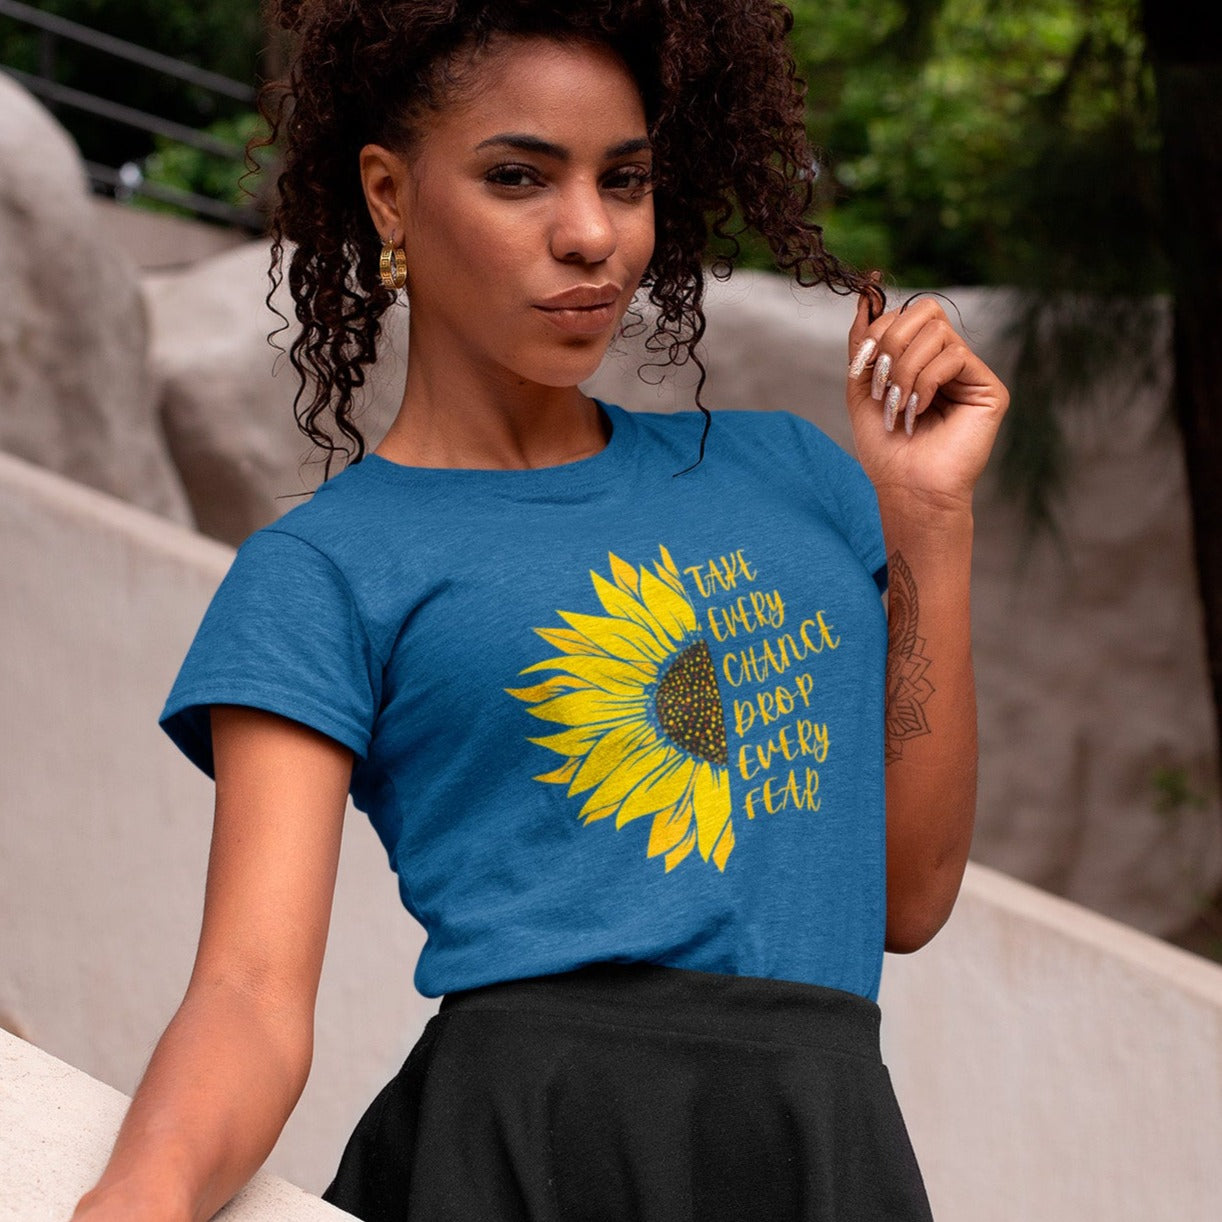 take-every-chance-drop-every-fear-heather-true-royal-blue-t-shirt-sunflower-mockup-of-a-classy-woman-at-a-park-mockup-of-a-classy-woman-at-a-park